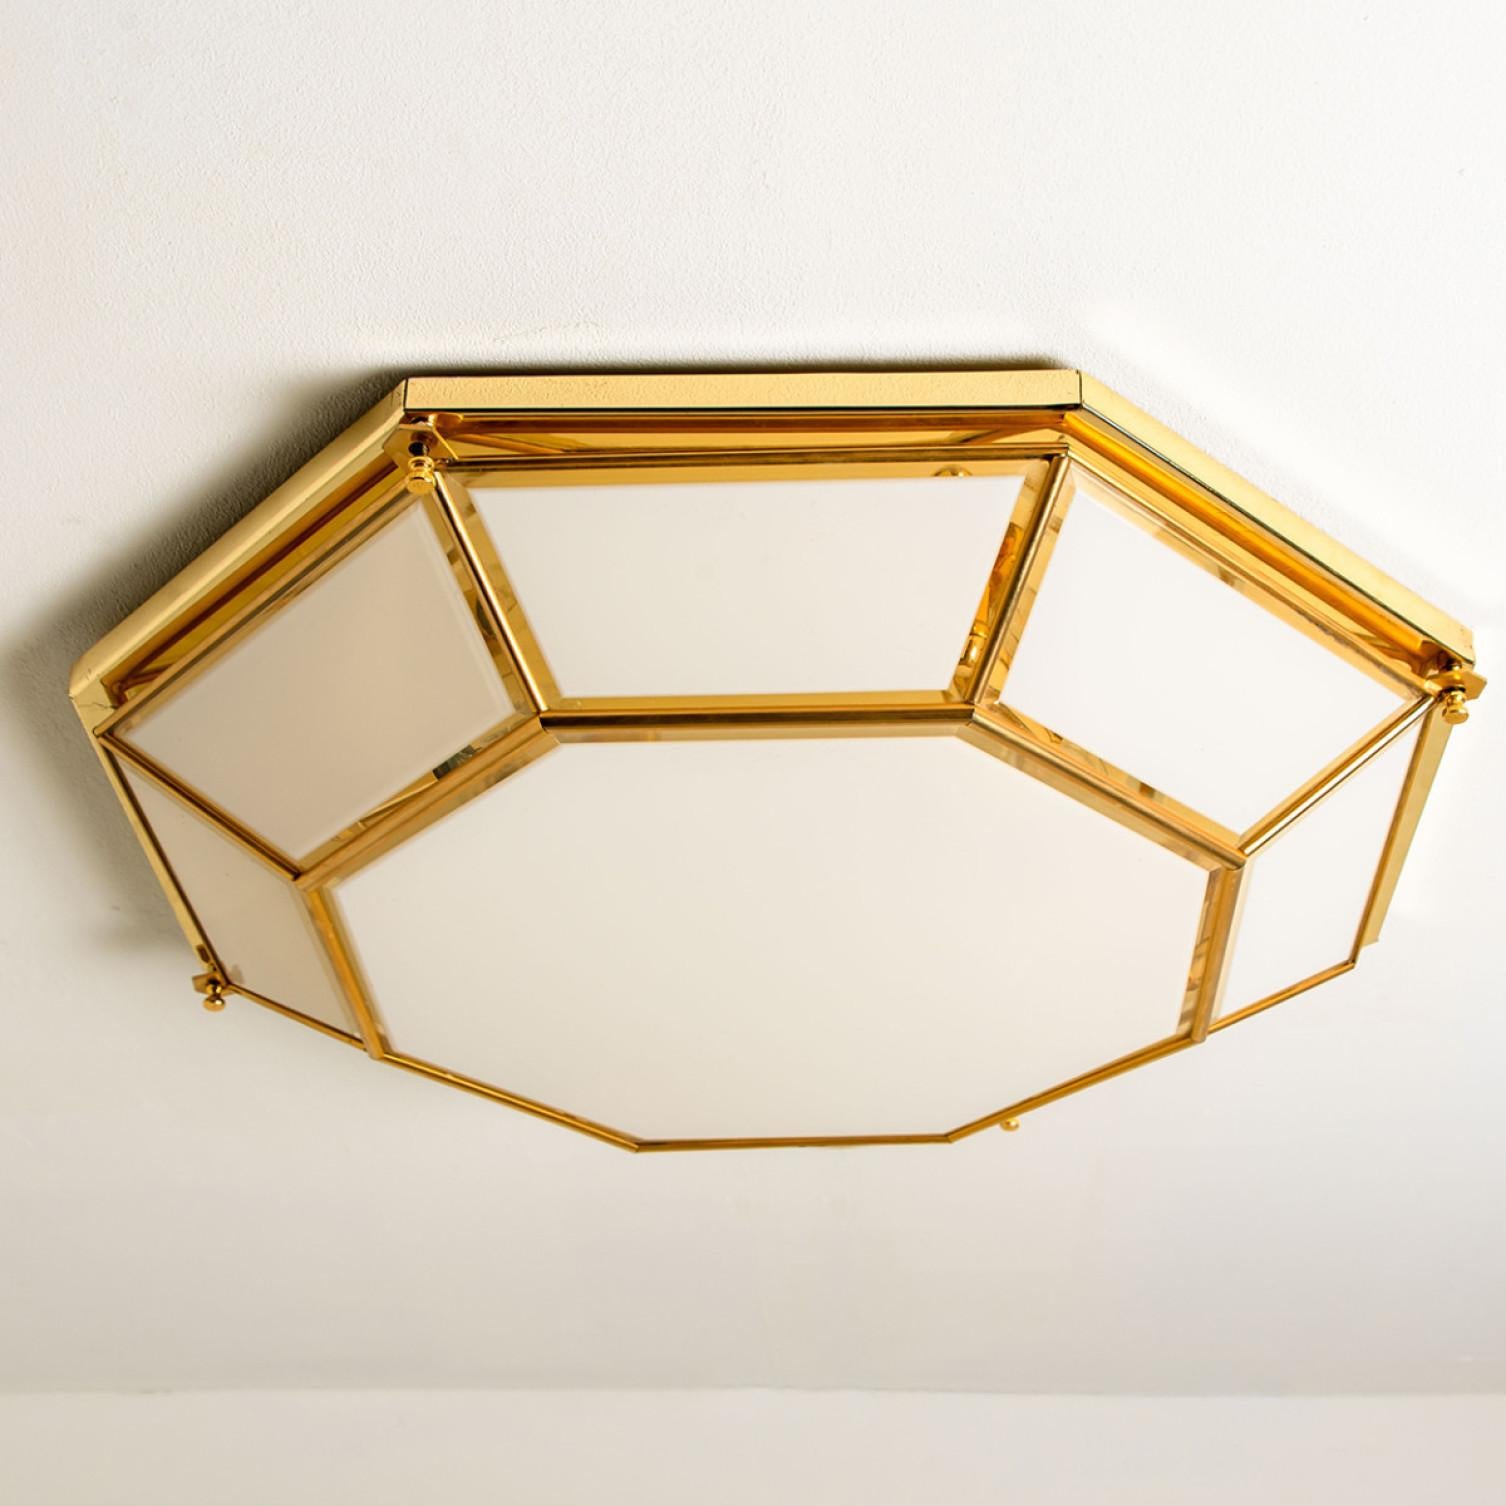 This beautiful and unique octagonal glass light flush mount or wall light is manufactured in Germany, during the 1970s, (early 1970s). Nice craftsmanship. Minimal, geometric and simply shaped design. Opal glass with brass frame.

Designed as